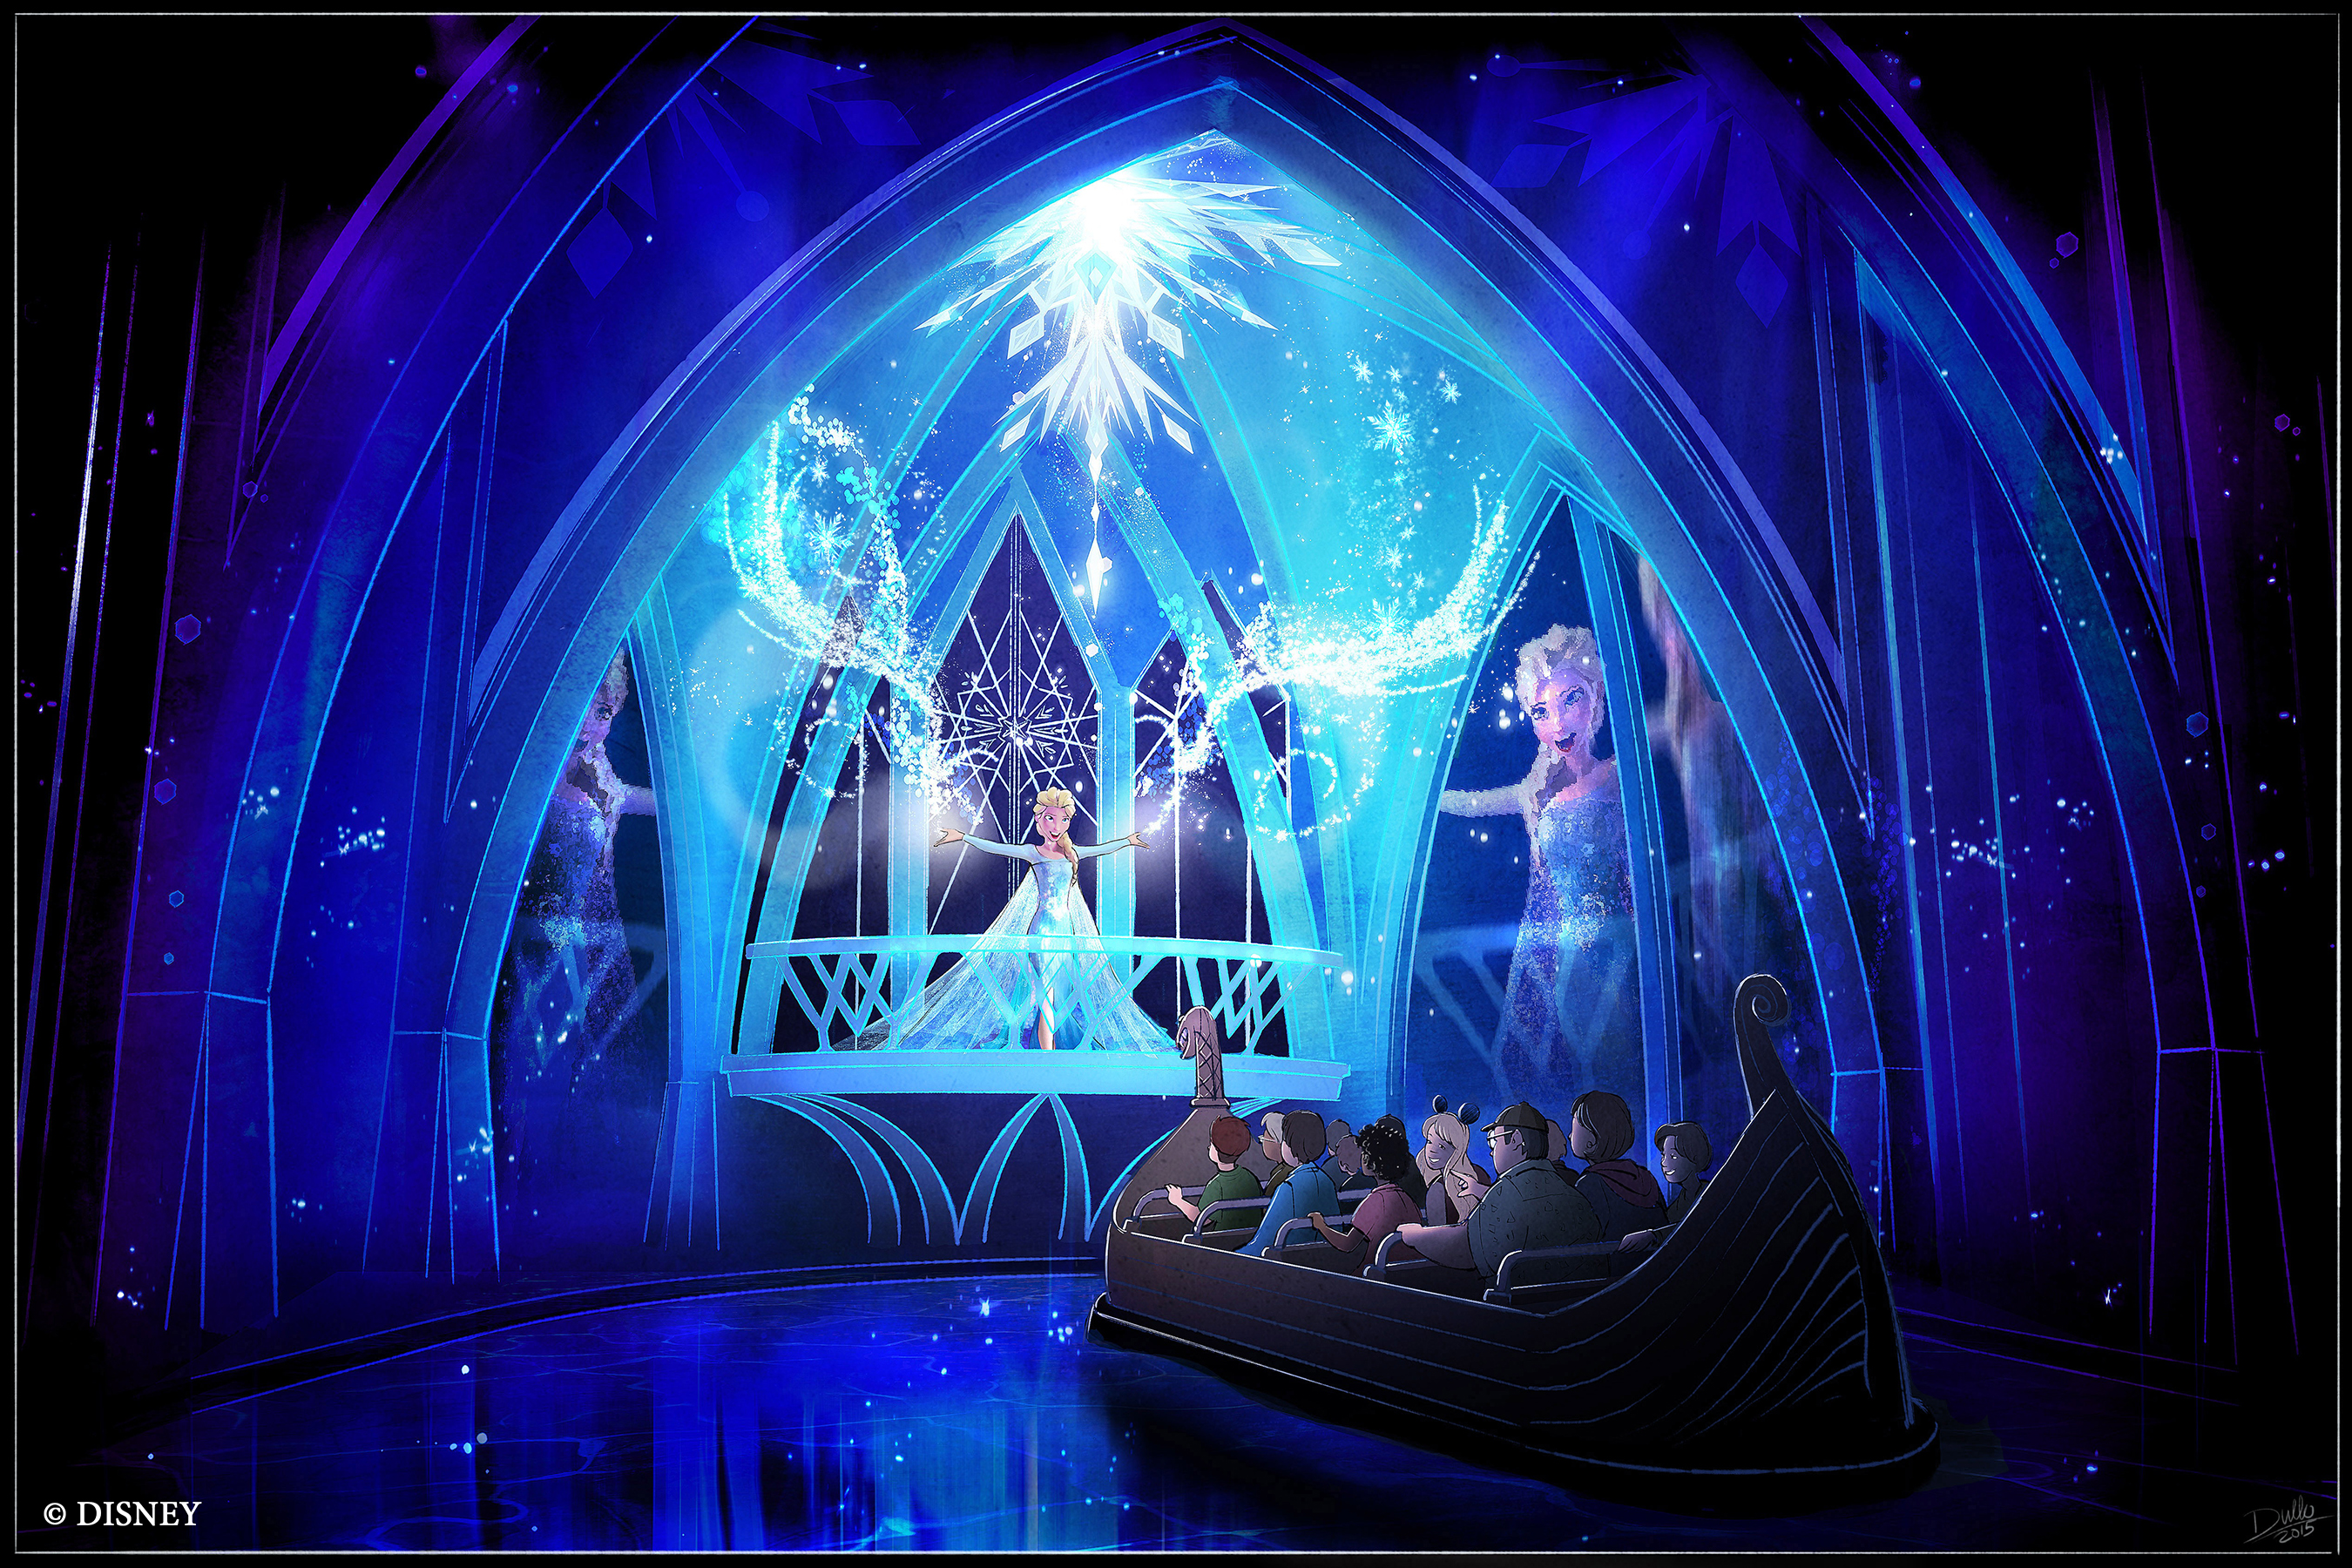 The "Frozen Ever After" attraction coming to Epcot in 2016 is an adventure fit for the entire family that will take guests through the kingdom of Arendelle. Guests will be transported to the Winter in Summer Celebration where Queen Elsa embraces her magical powers and creates a winter-in-summer day for the entire kingdom. "Frozen Ever After" will be located in the Norway Pavilion at Epcot, which is one of four theme parks at Walt Disney World Resort in Lake Buena Vista, Fla. (Disney)